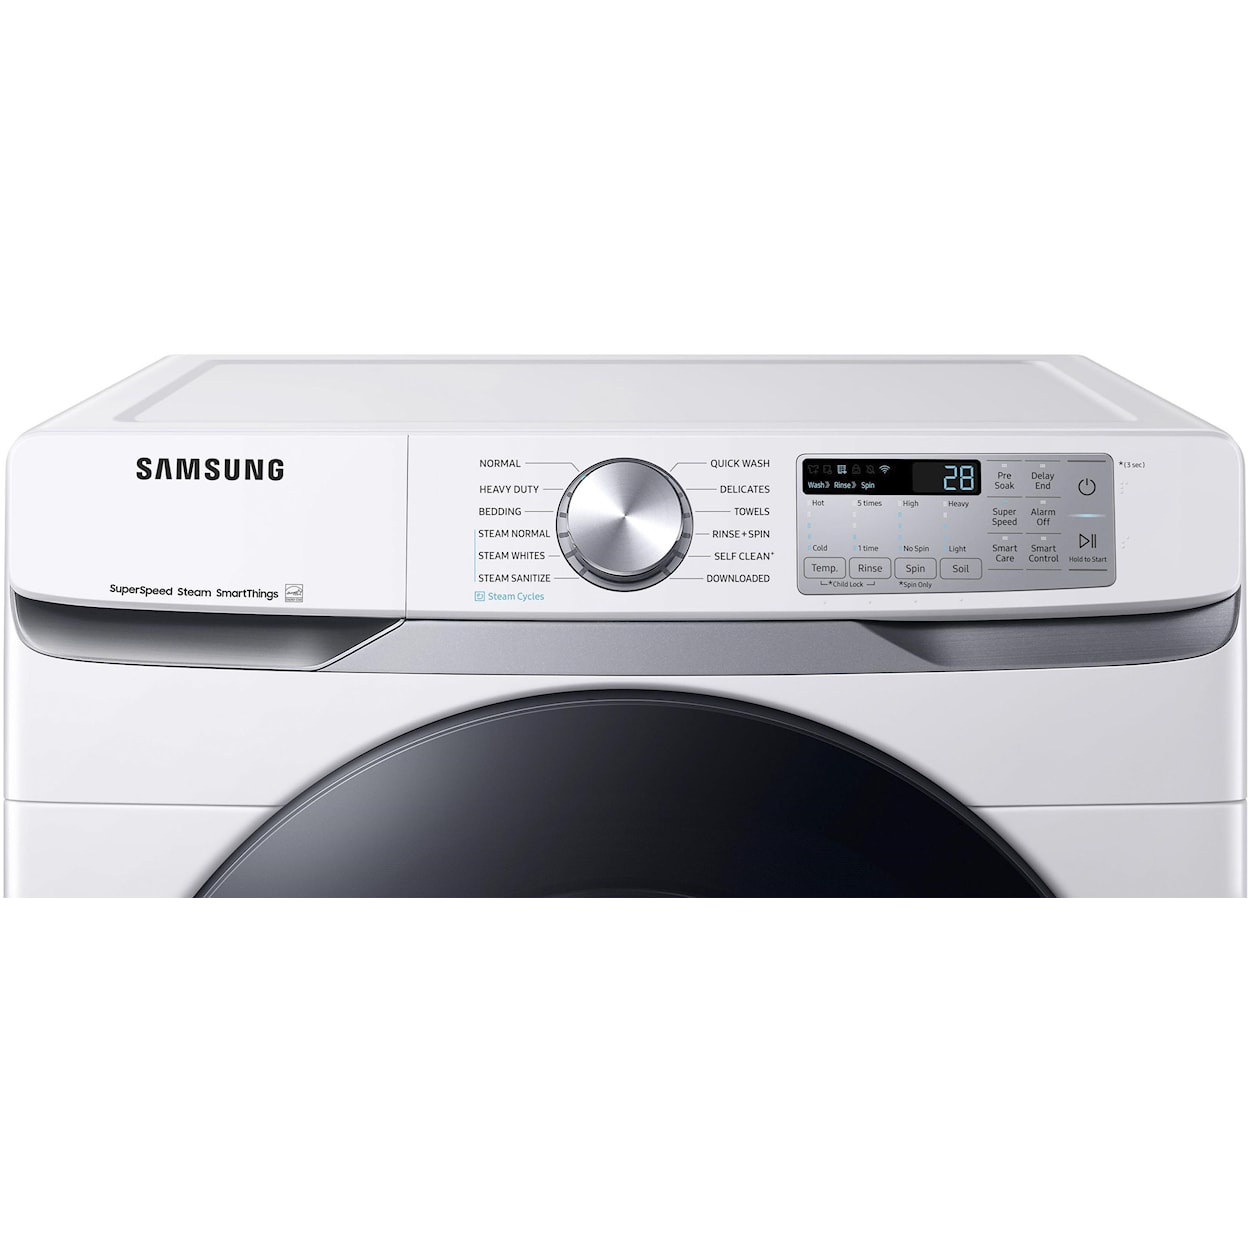 Samsung Appliances Front Load Washers - Samsung 4.5 cu. ft. Large Capacity Smart Washer